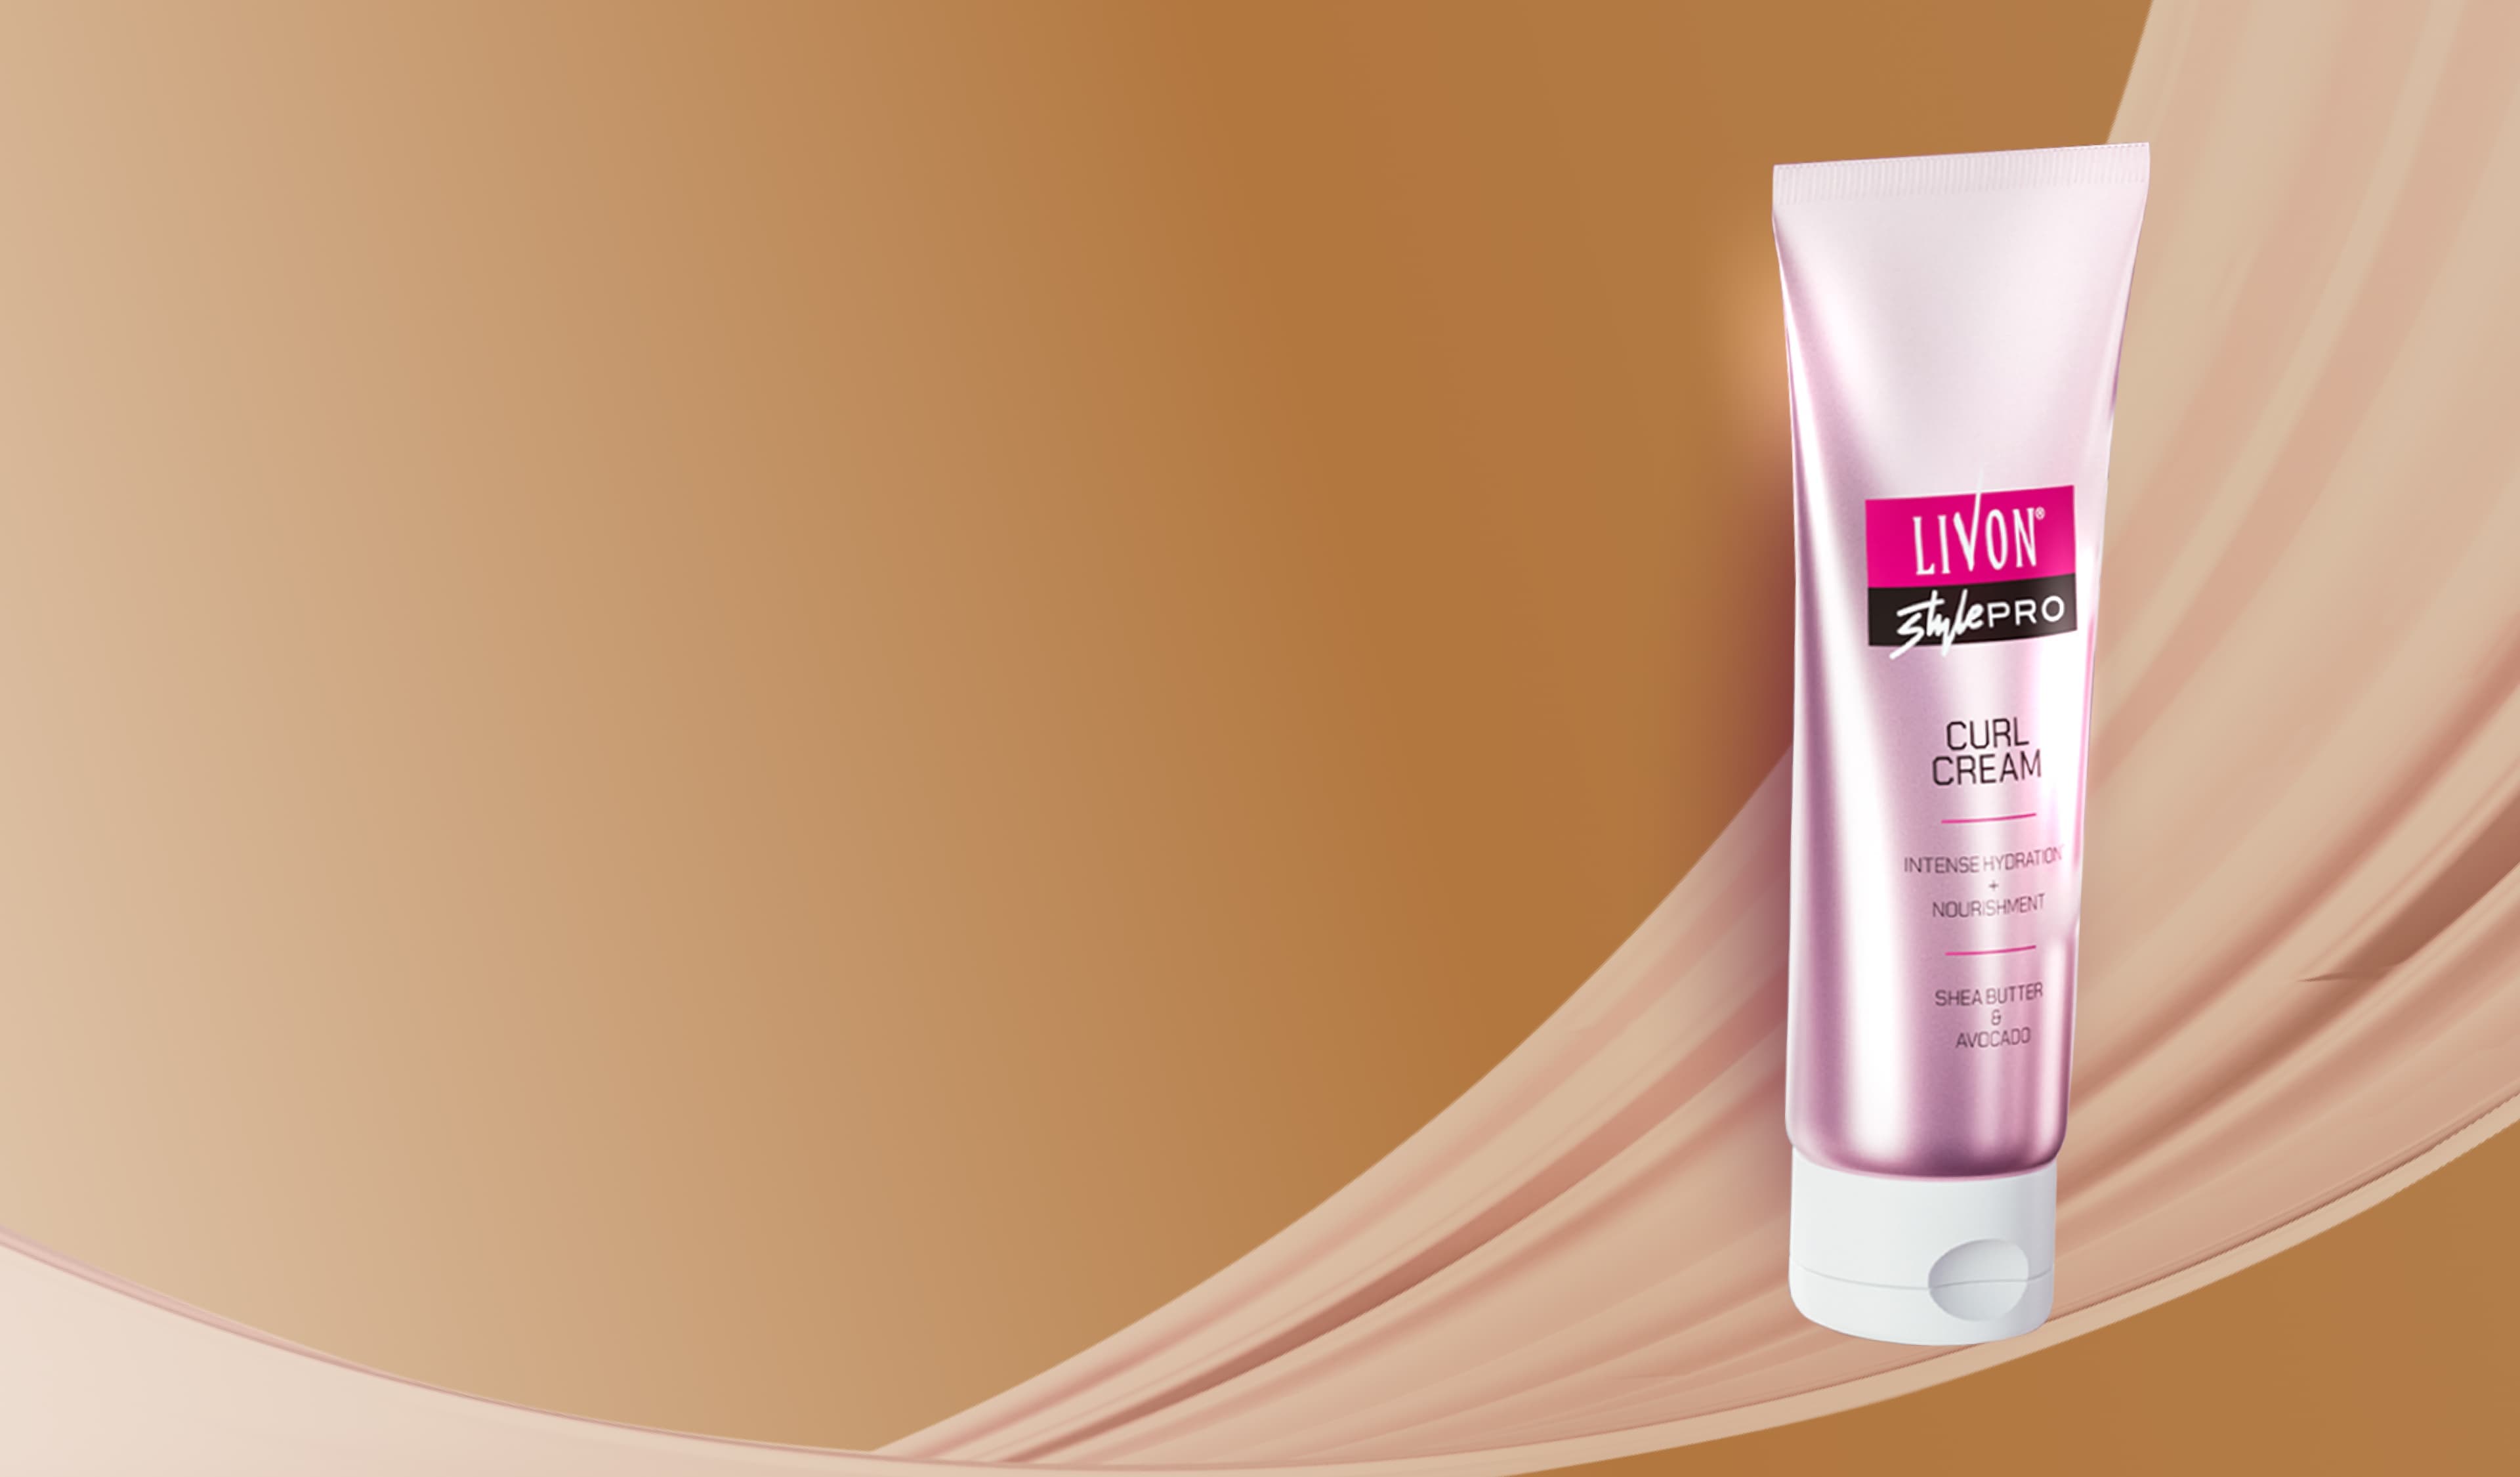 How to use Livon Style Pro Hair Curl Cream